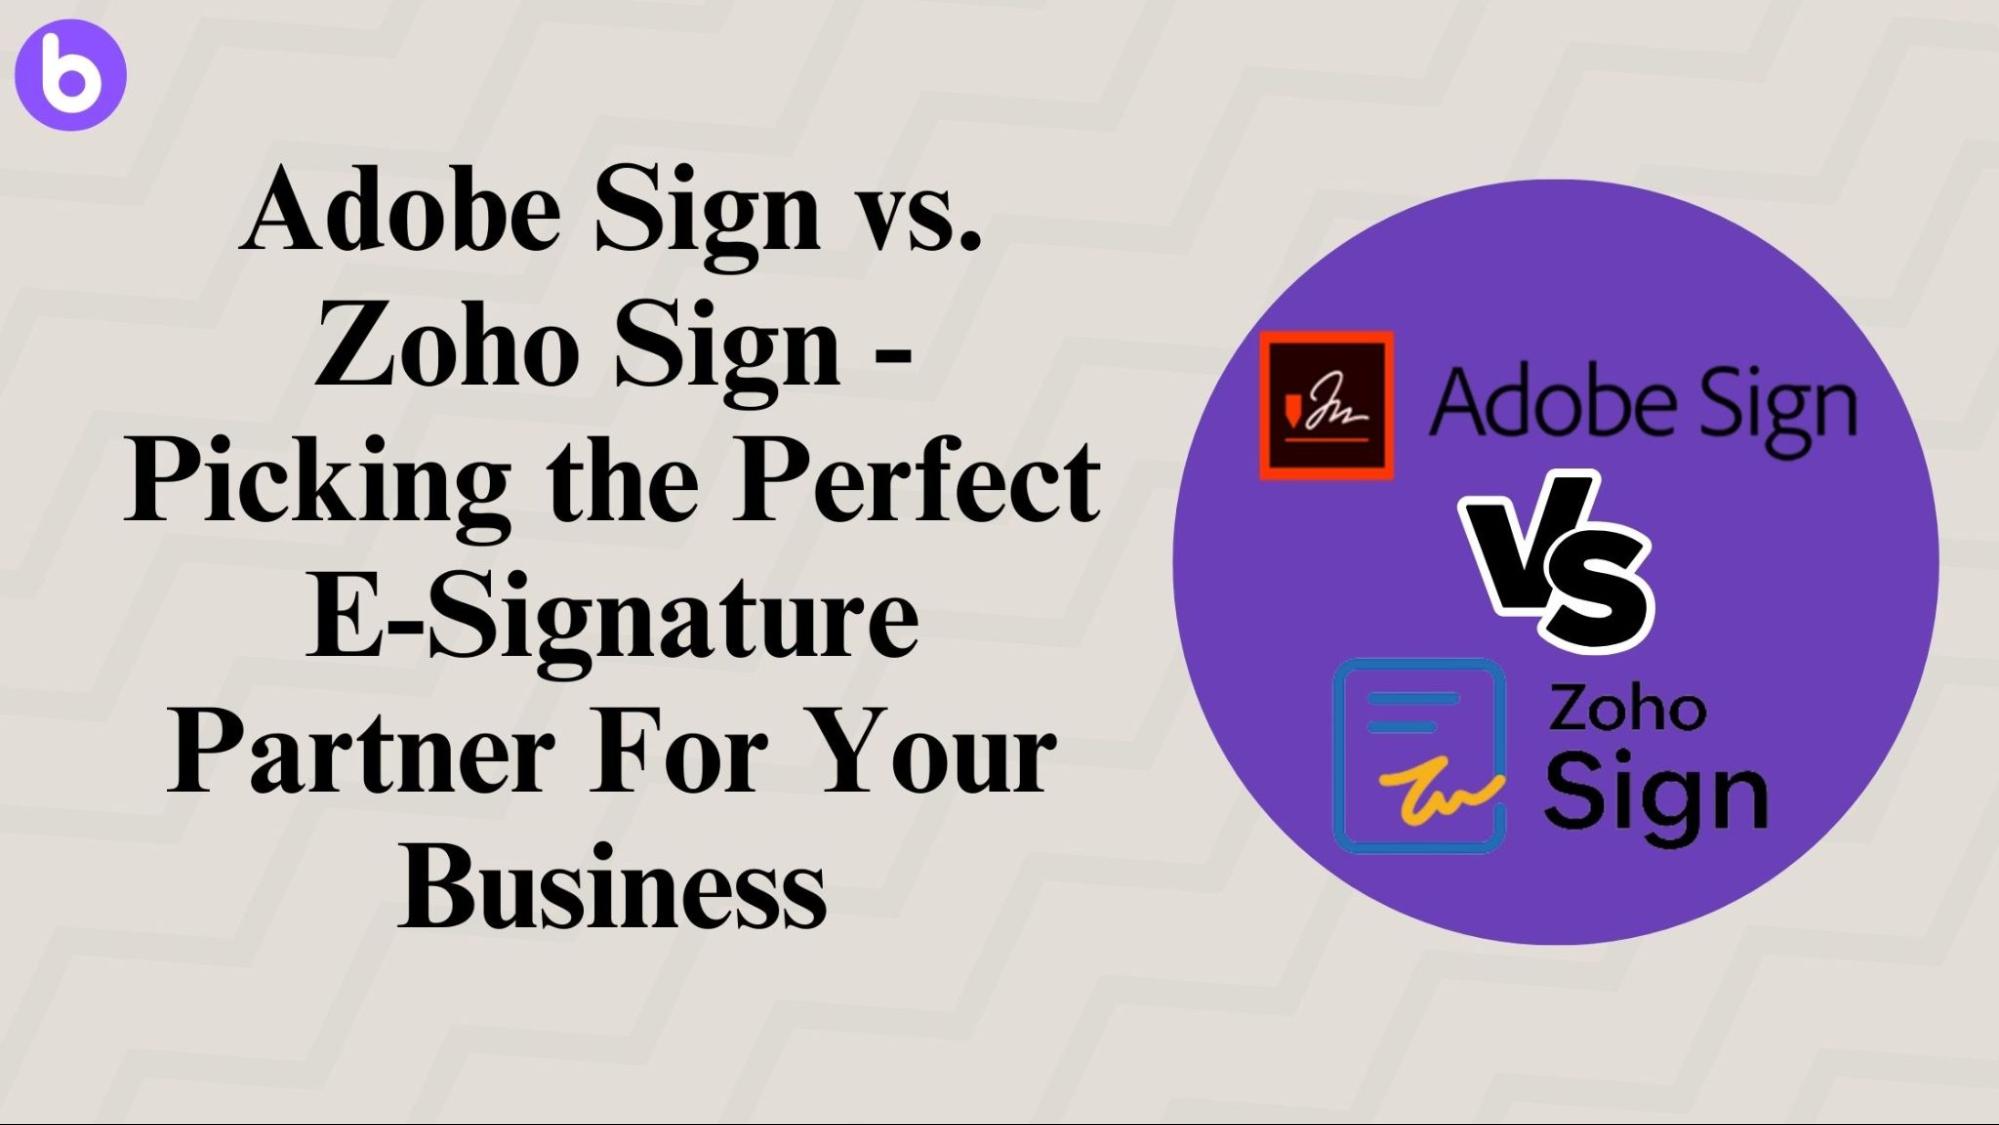 Adobe Sign vs. Zoho Sign - Picking the Perfect E-Signature Partner For Your Business